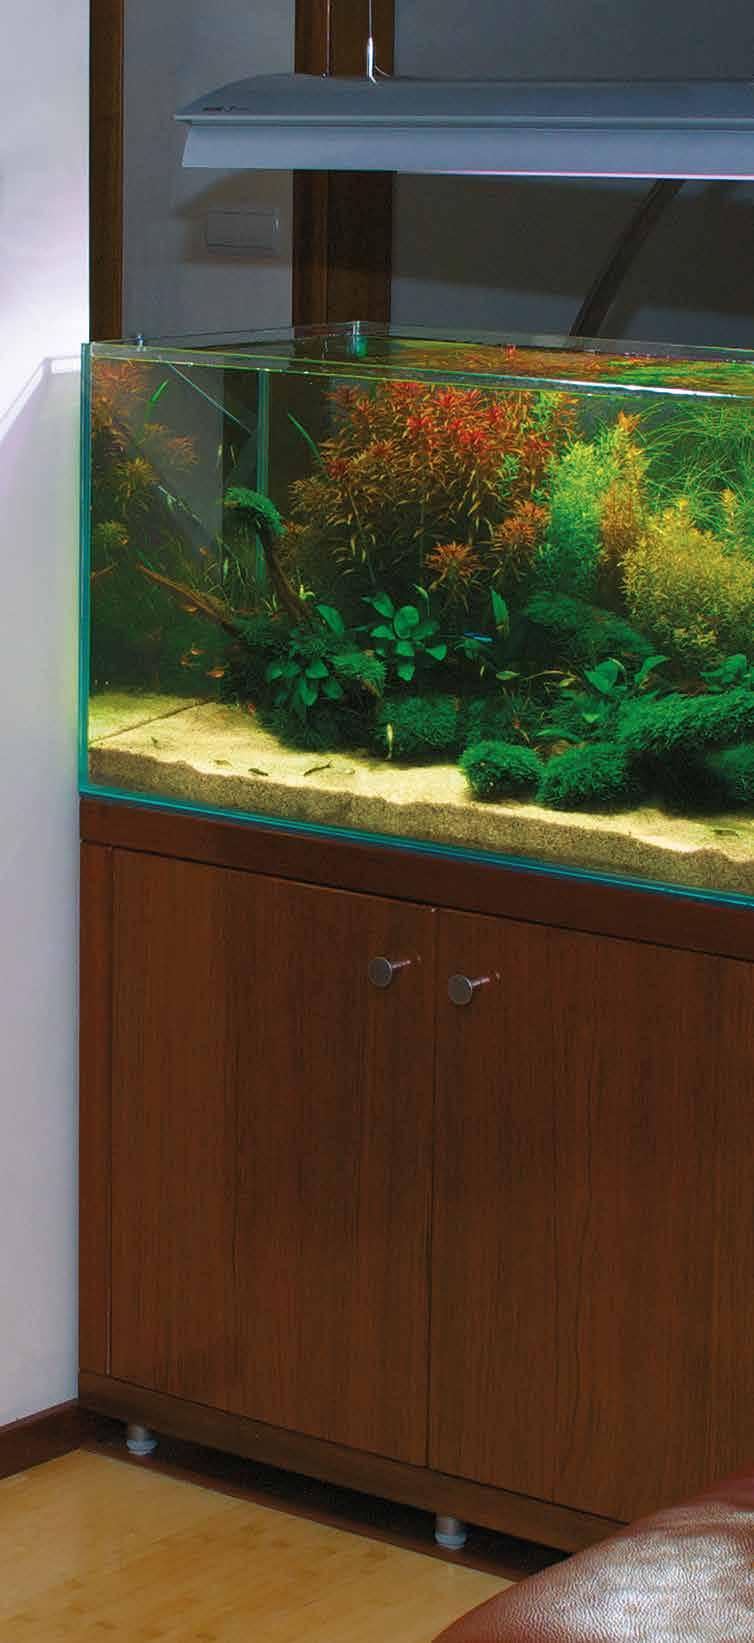 Your aquarium will be a wonderful natural feature of any interior.